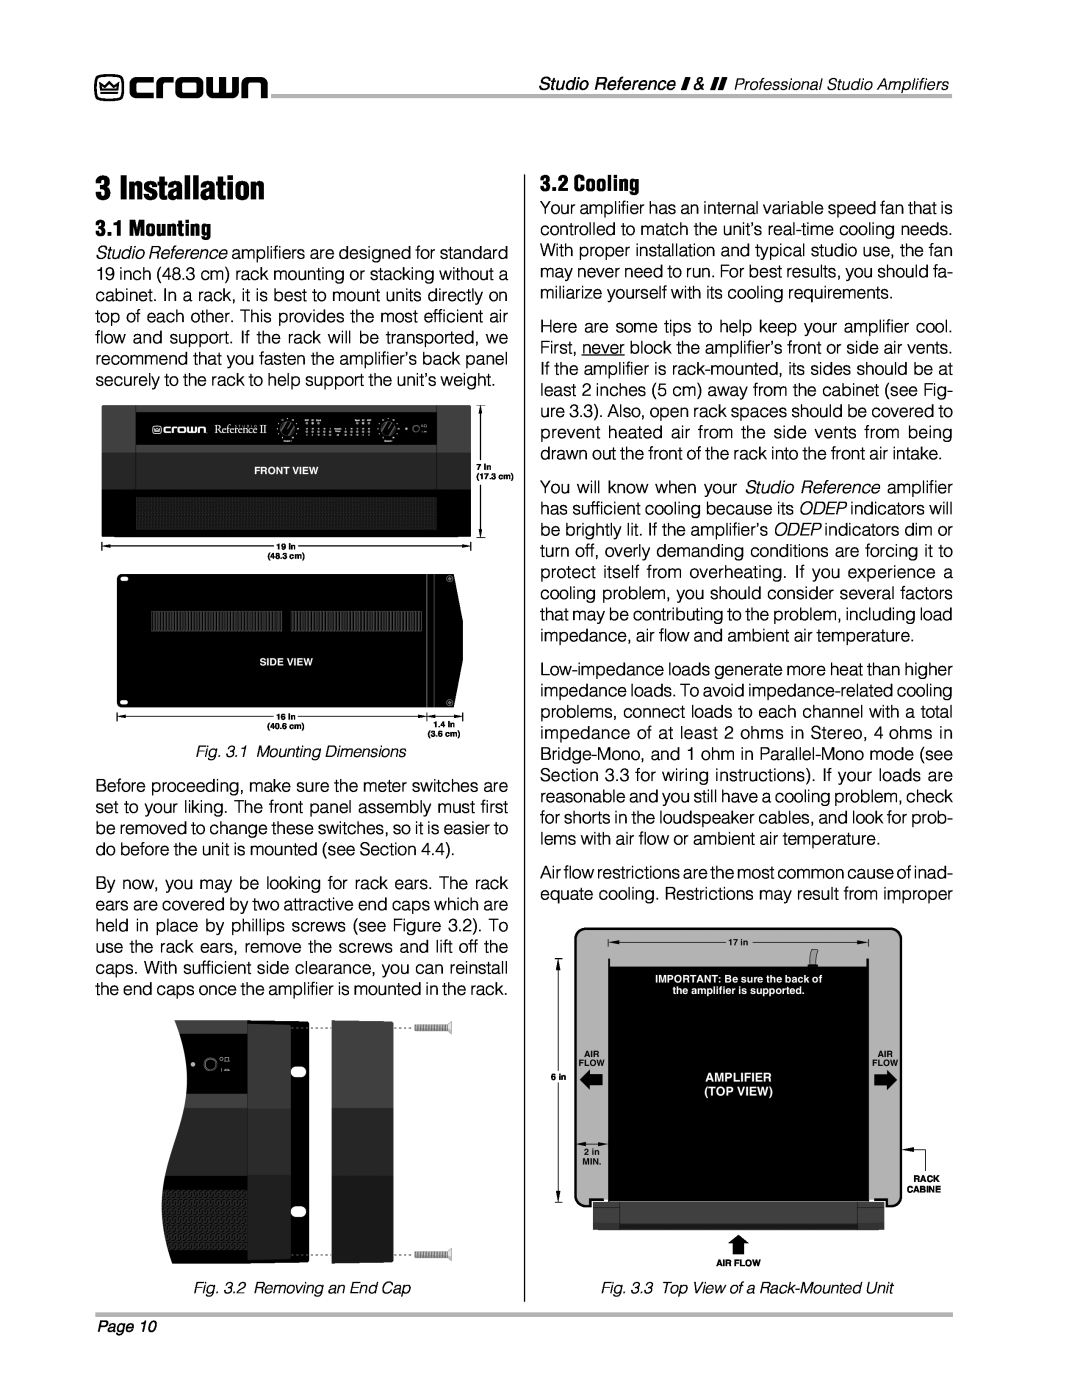 Crown Audio STUDIO AMPLIFIER owner manual Installation, Mounting, Cooling 